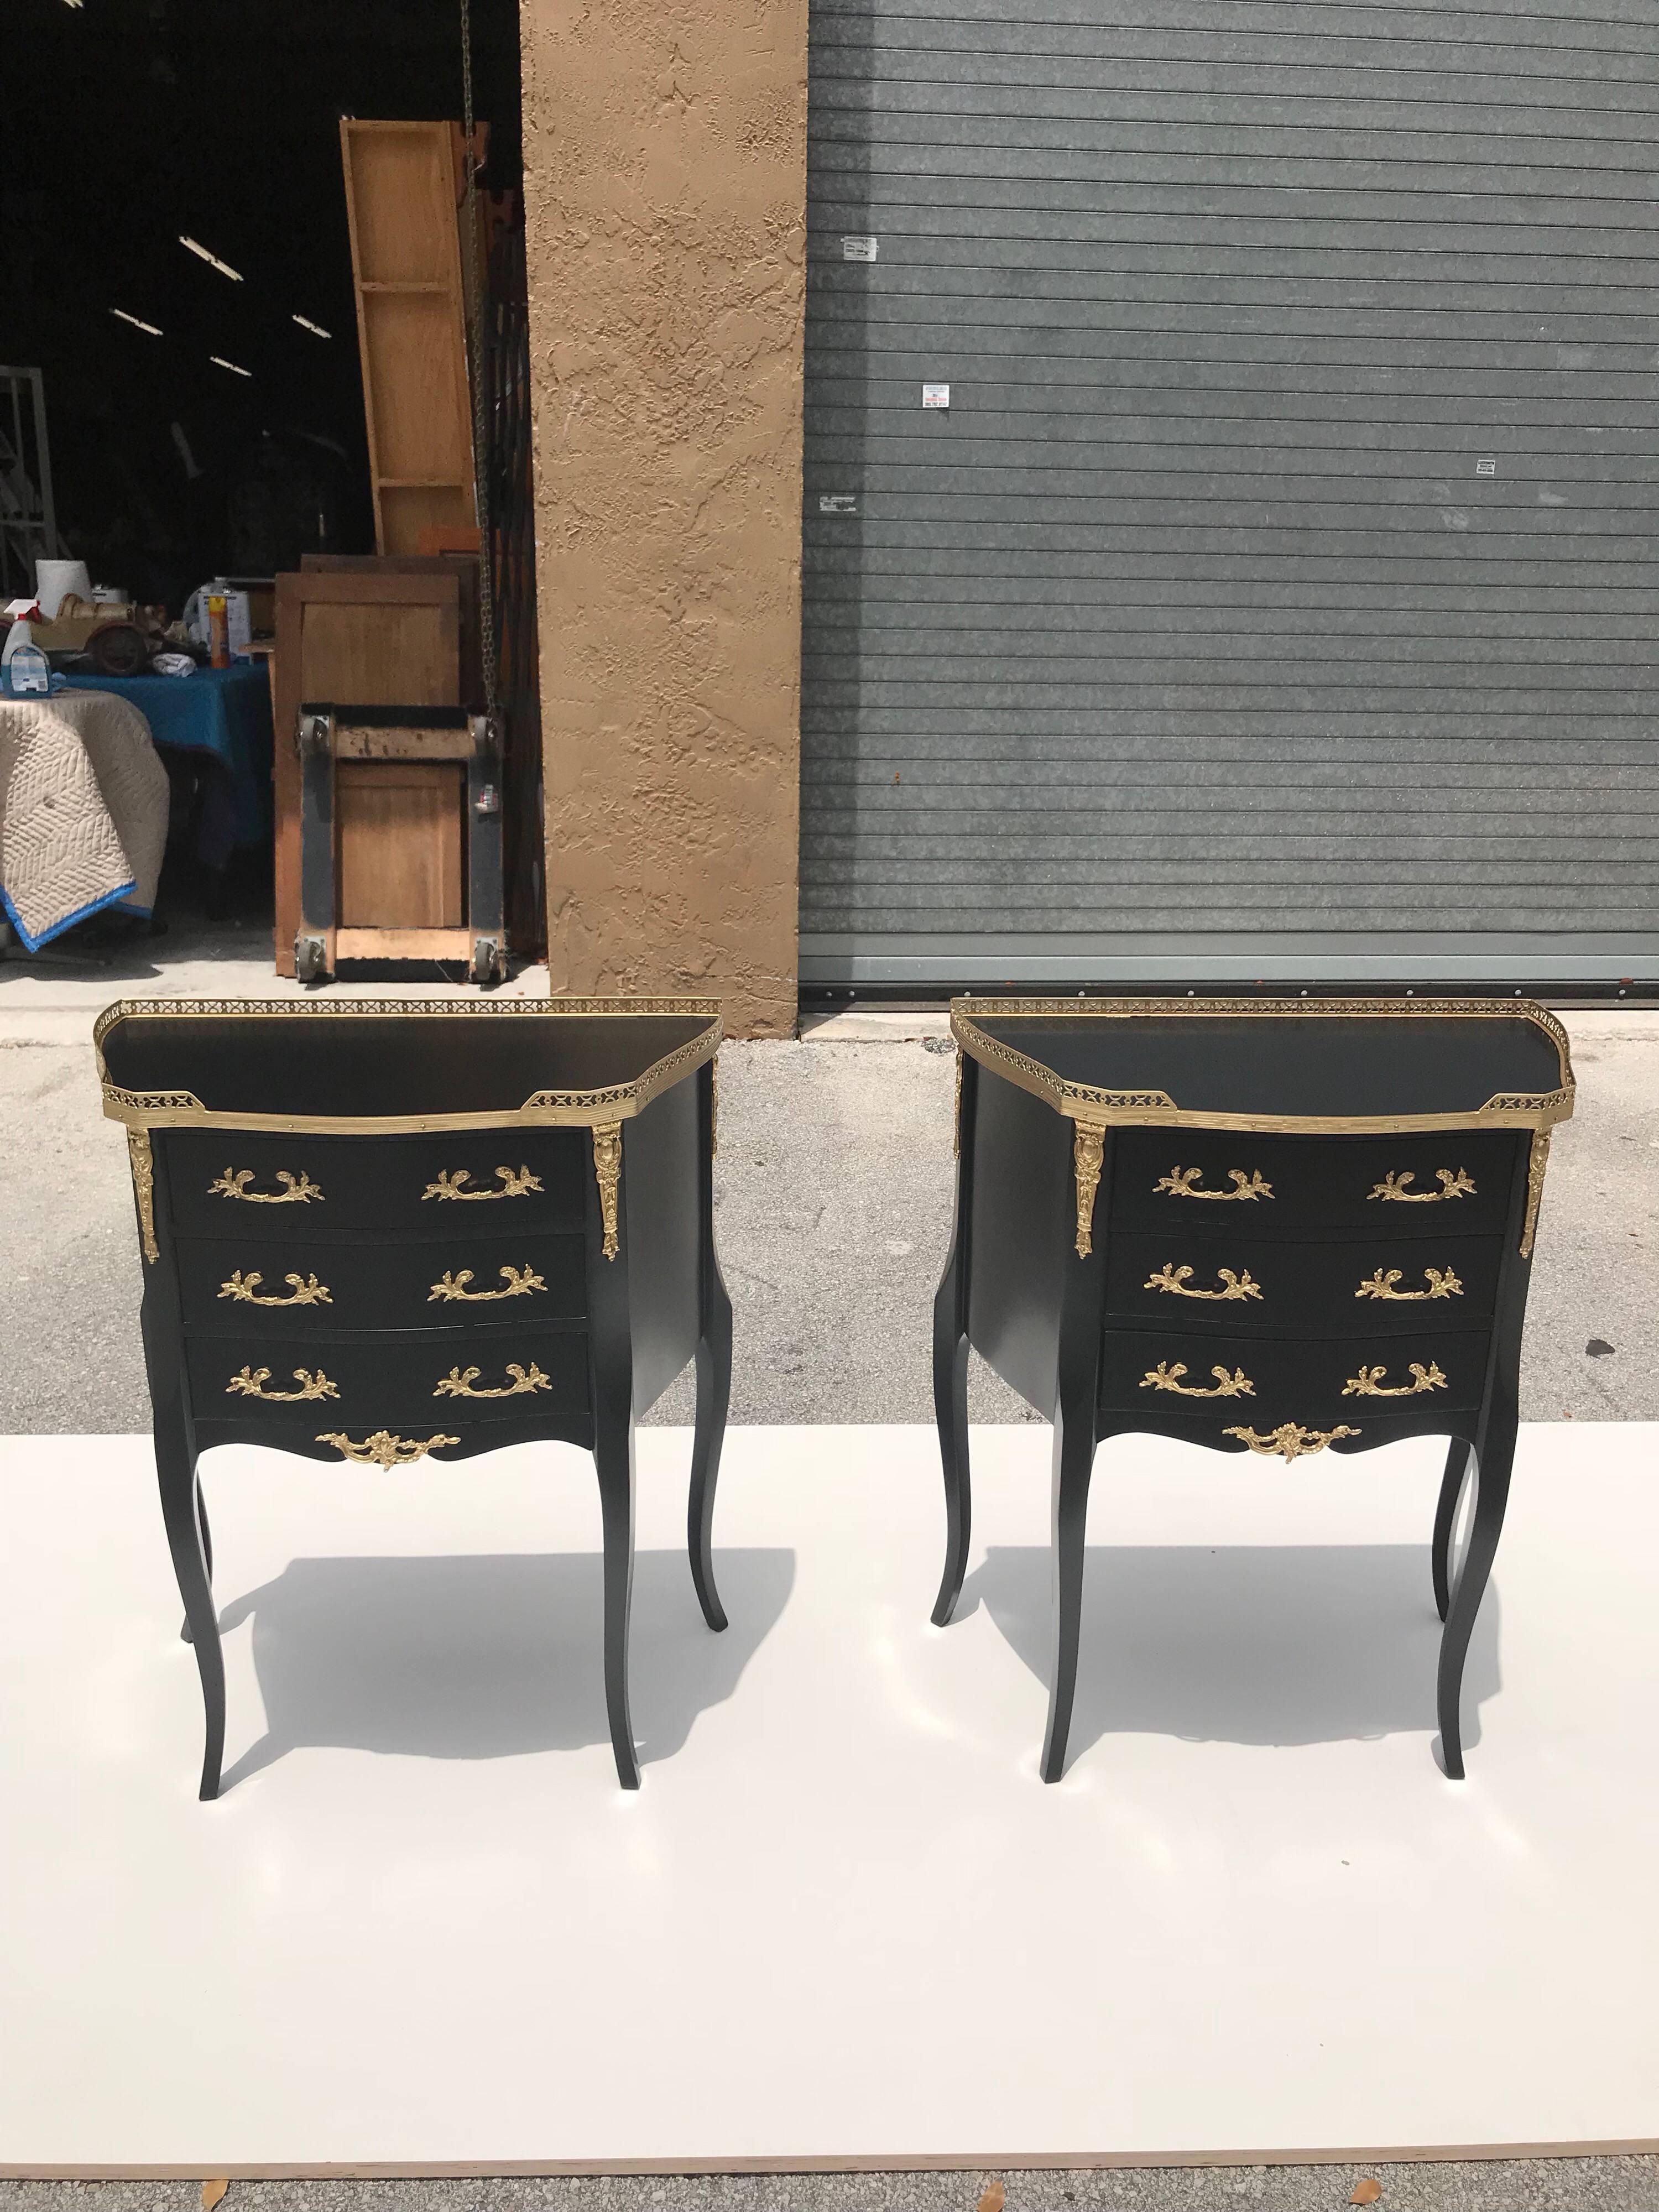 Monumental pair of French Louis XVI ebonized nightstands by Maison Jansen. This pair of Louis XVI bedside commodes or side table is composed of ebonized wood with bronze hardware detail, three drawers and four Sabre legs. The pair of nightstand are